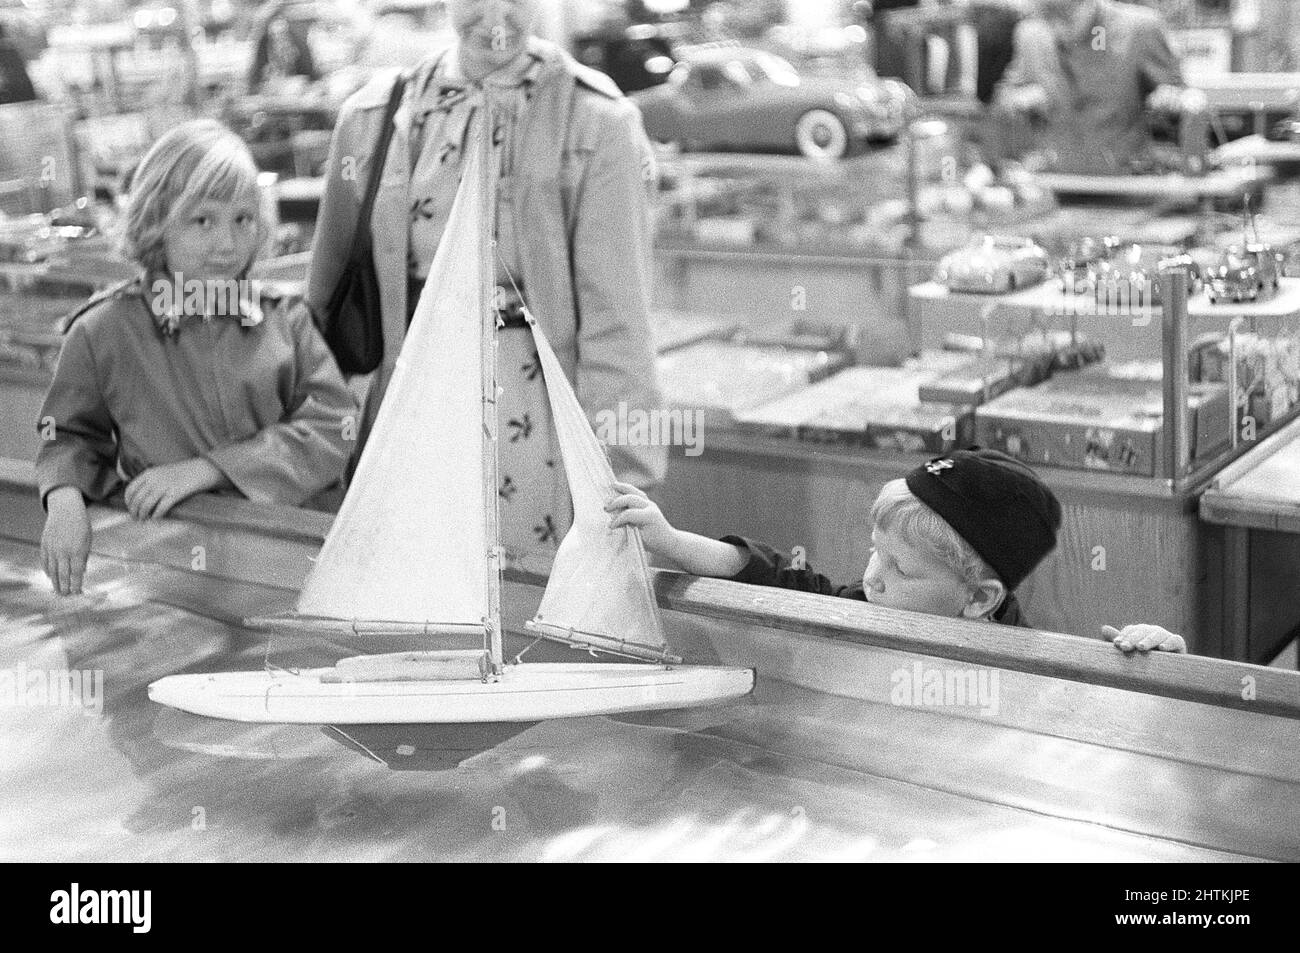 Toys in the 1950s. At a department store a boy is curious of the nice sailboat model floating in the water and touches it. Sweden 1954 Kristoffersson ref 2A-33 Stock Photo